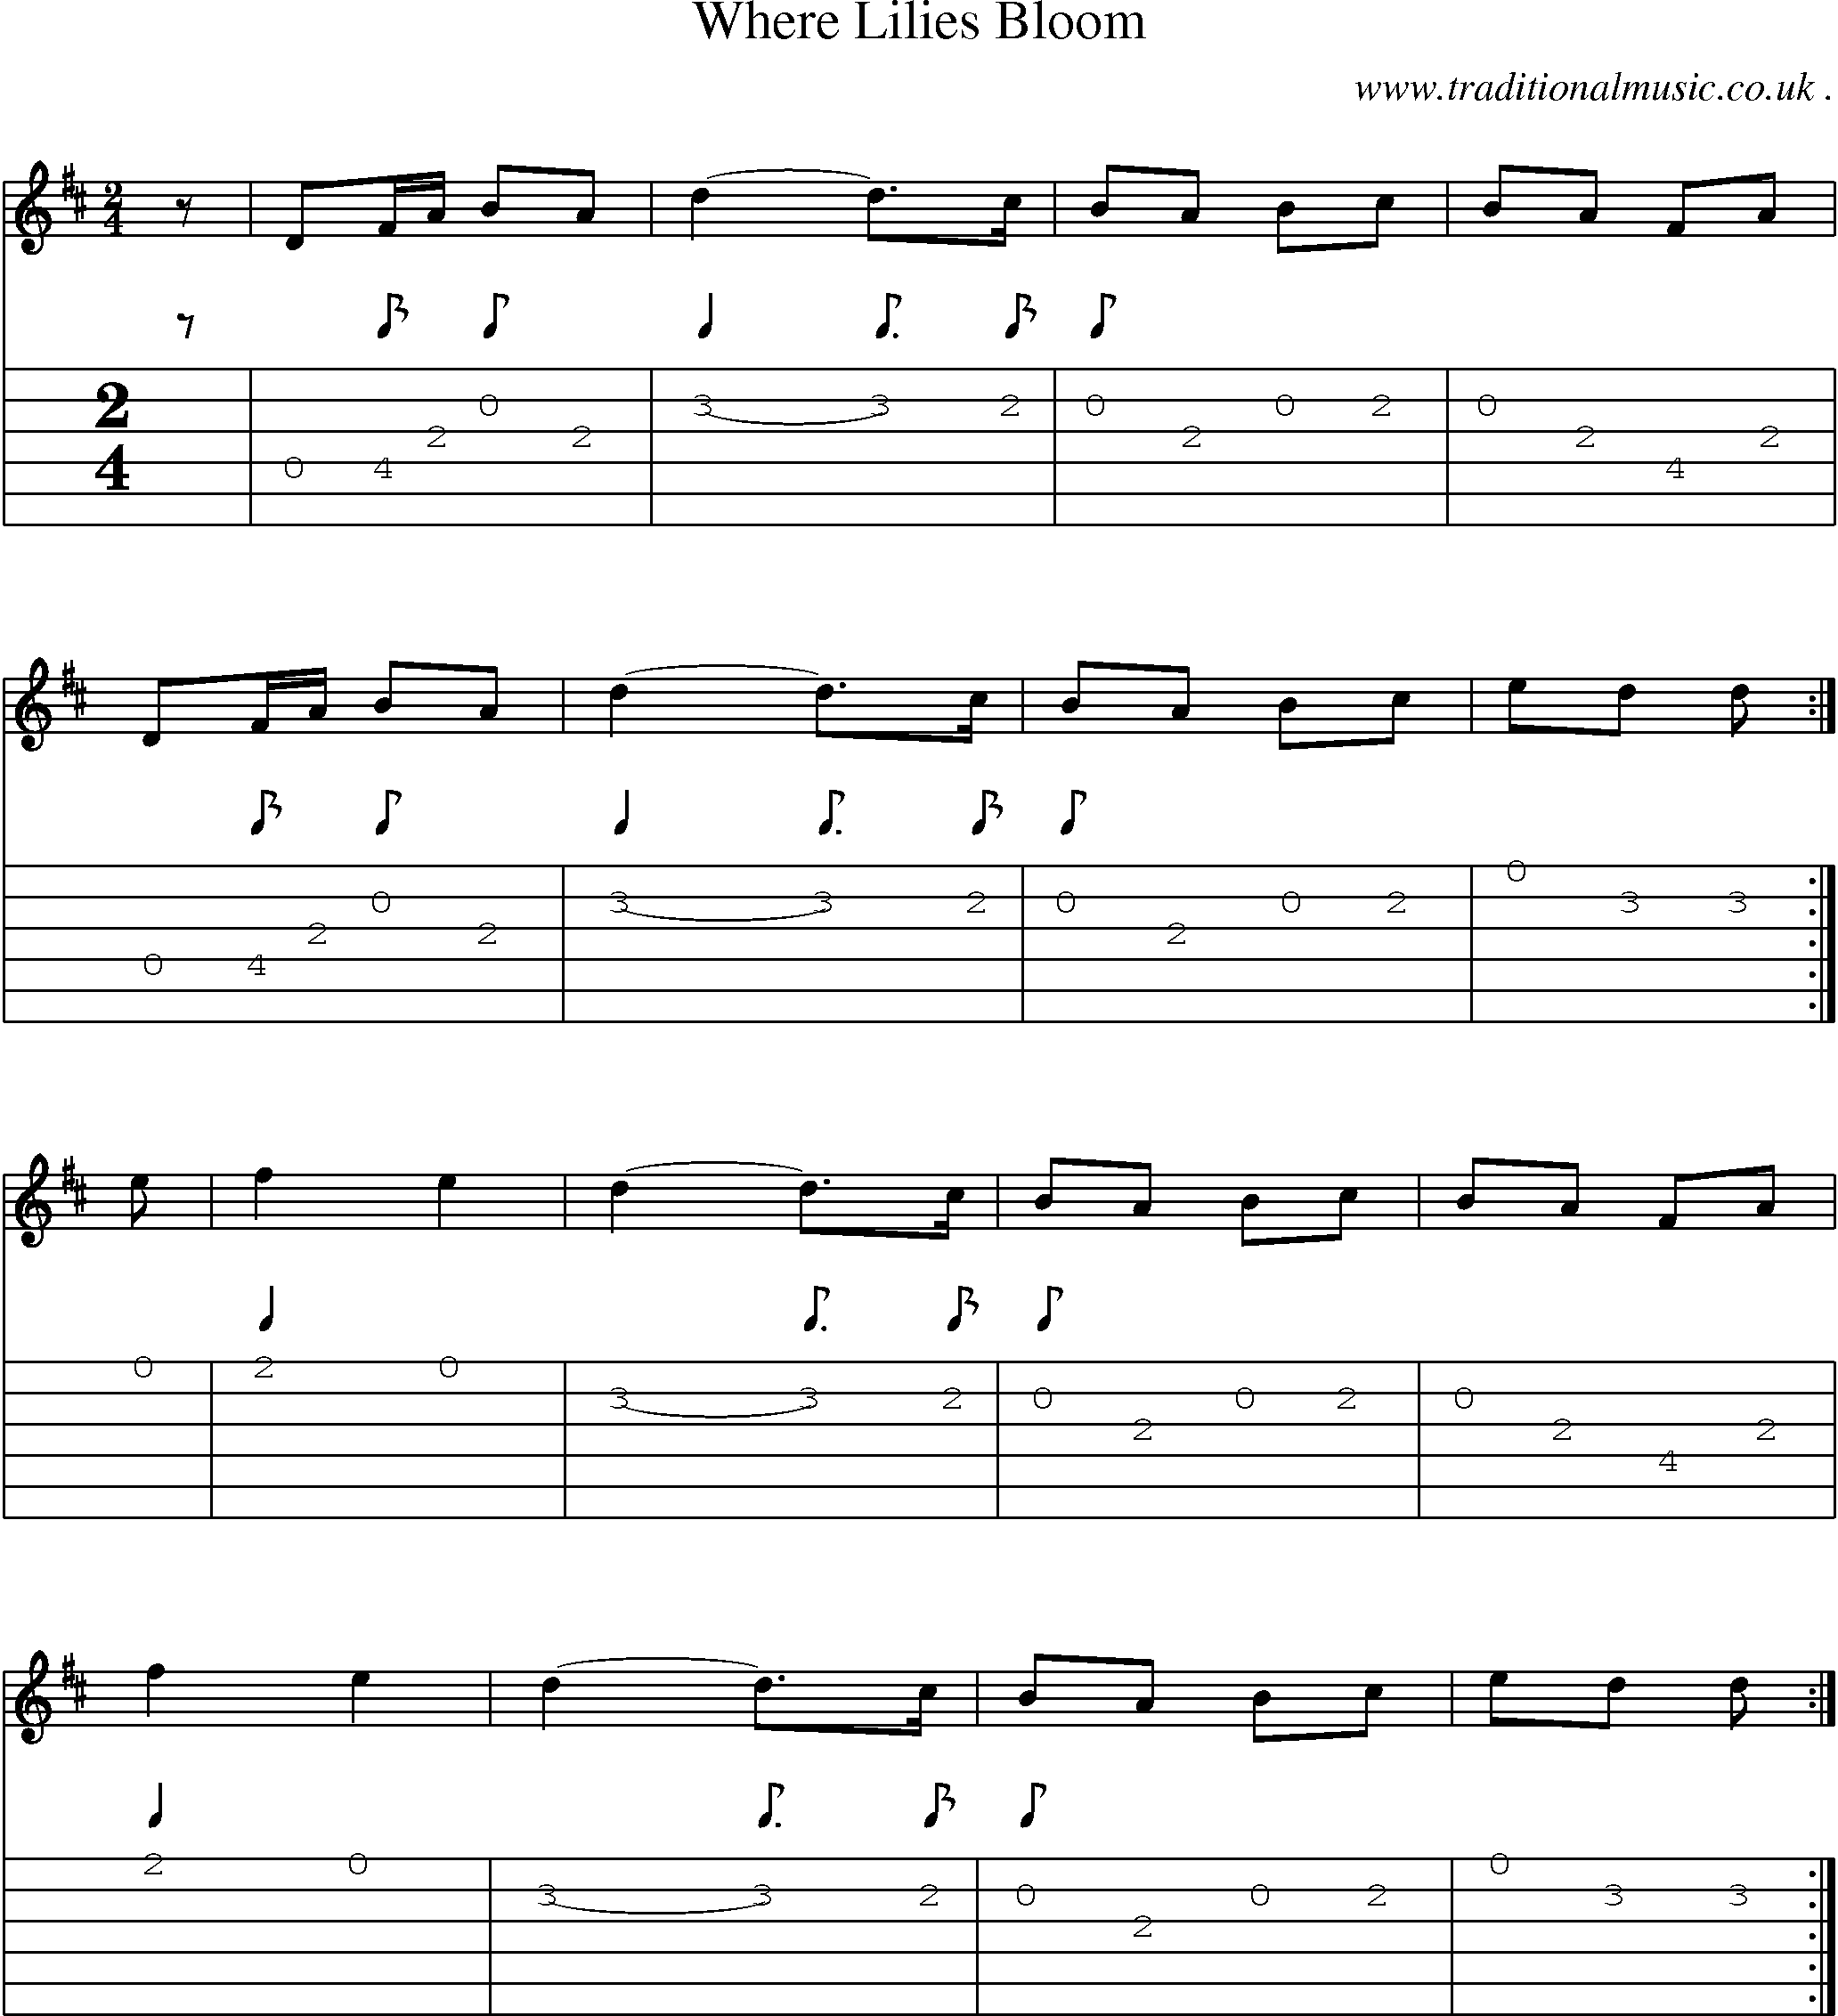 Sheet-Music and Guitar Tabs for Where Lilies Bloom